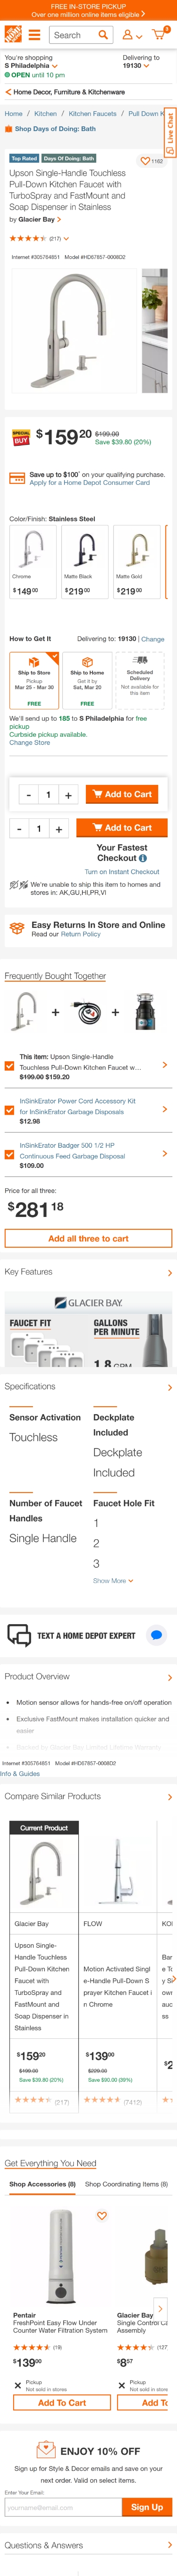 homedepot product page mobile